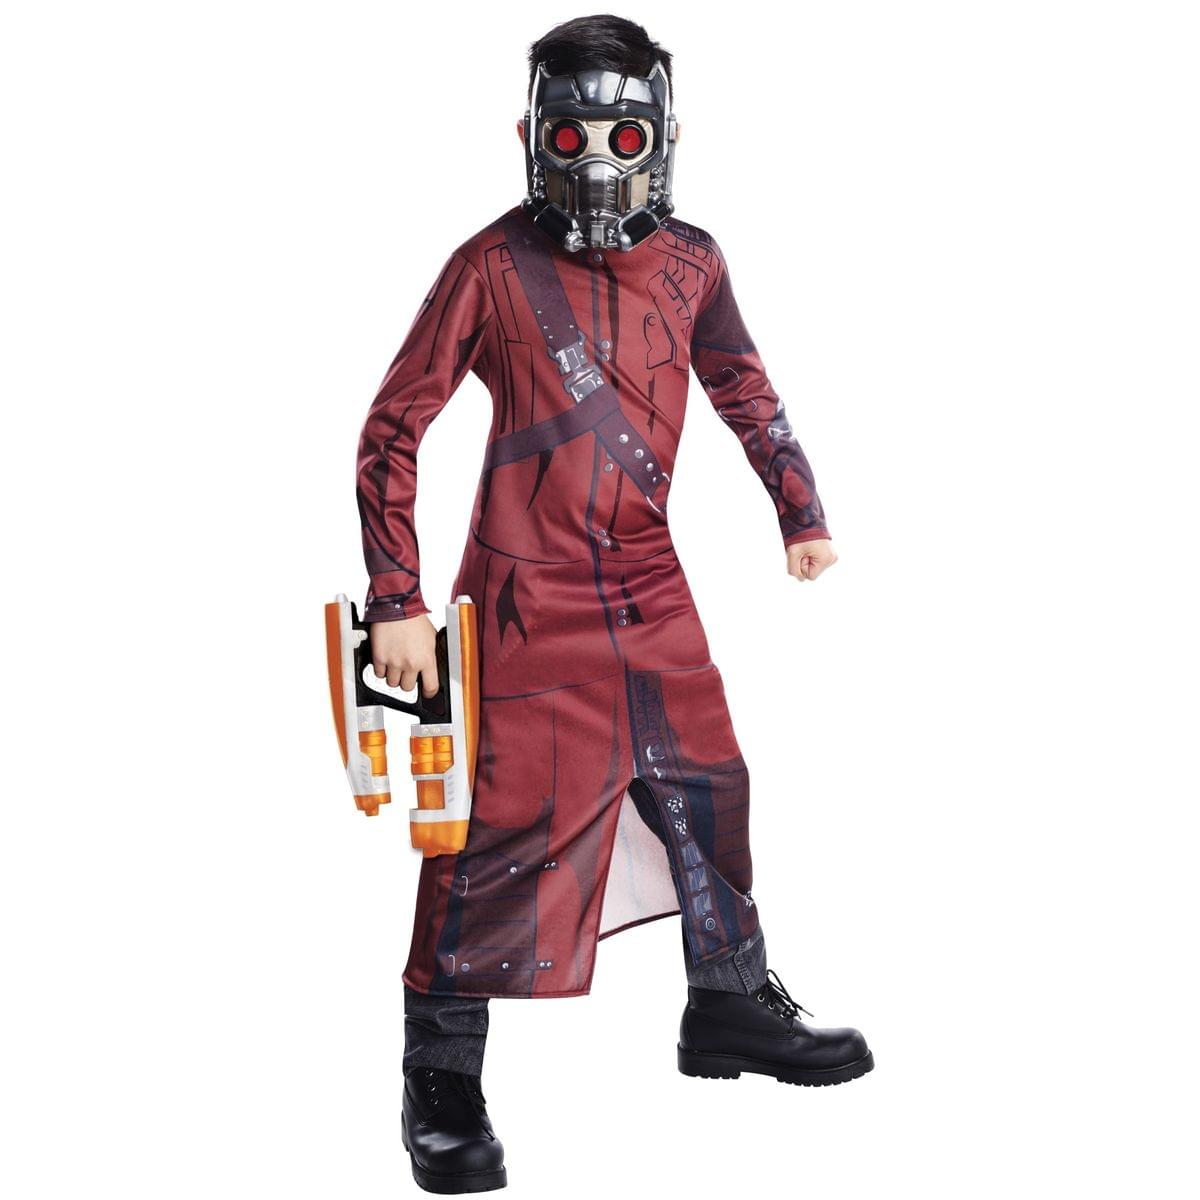 Guardians Of The Galaxy Marvel Star-Lord Child Costume